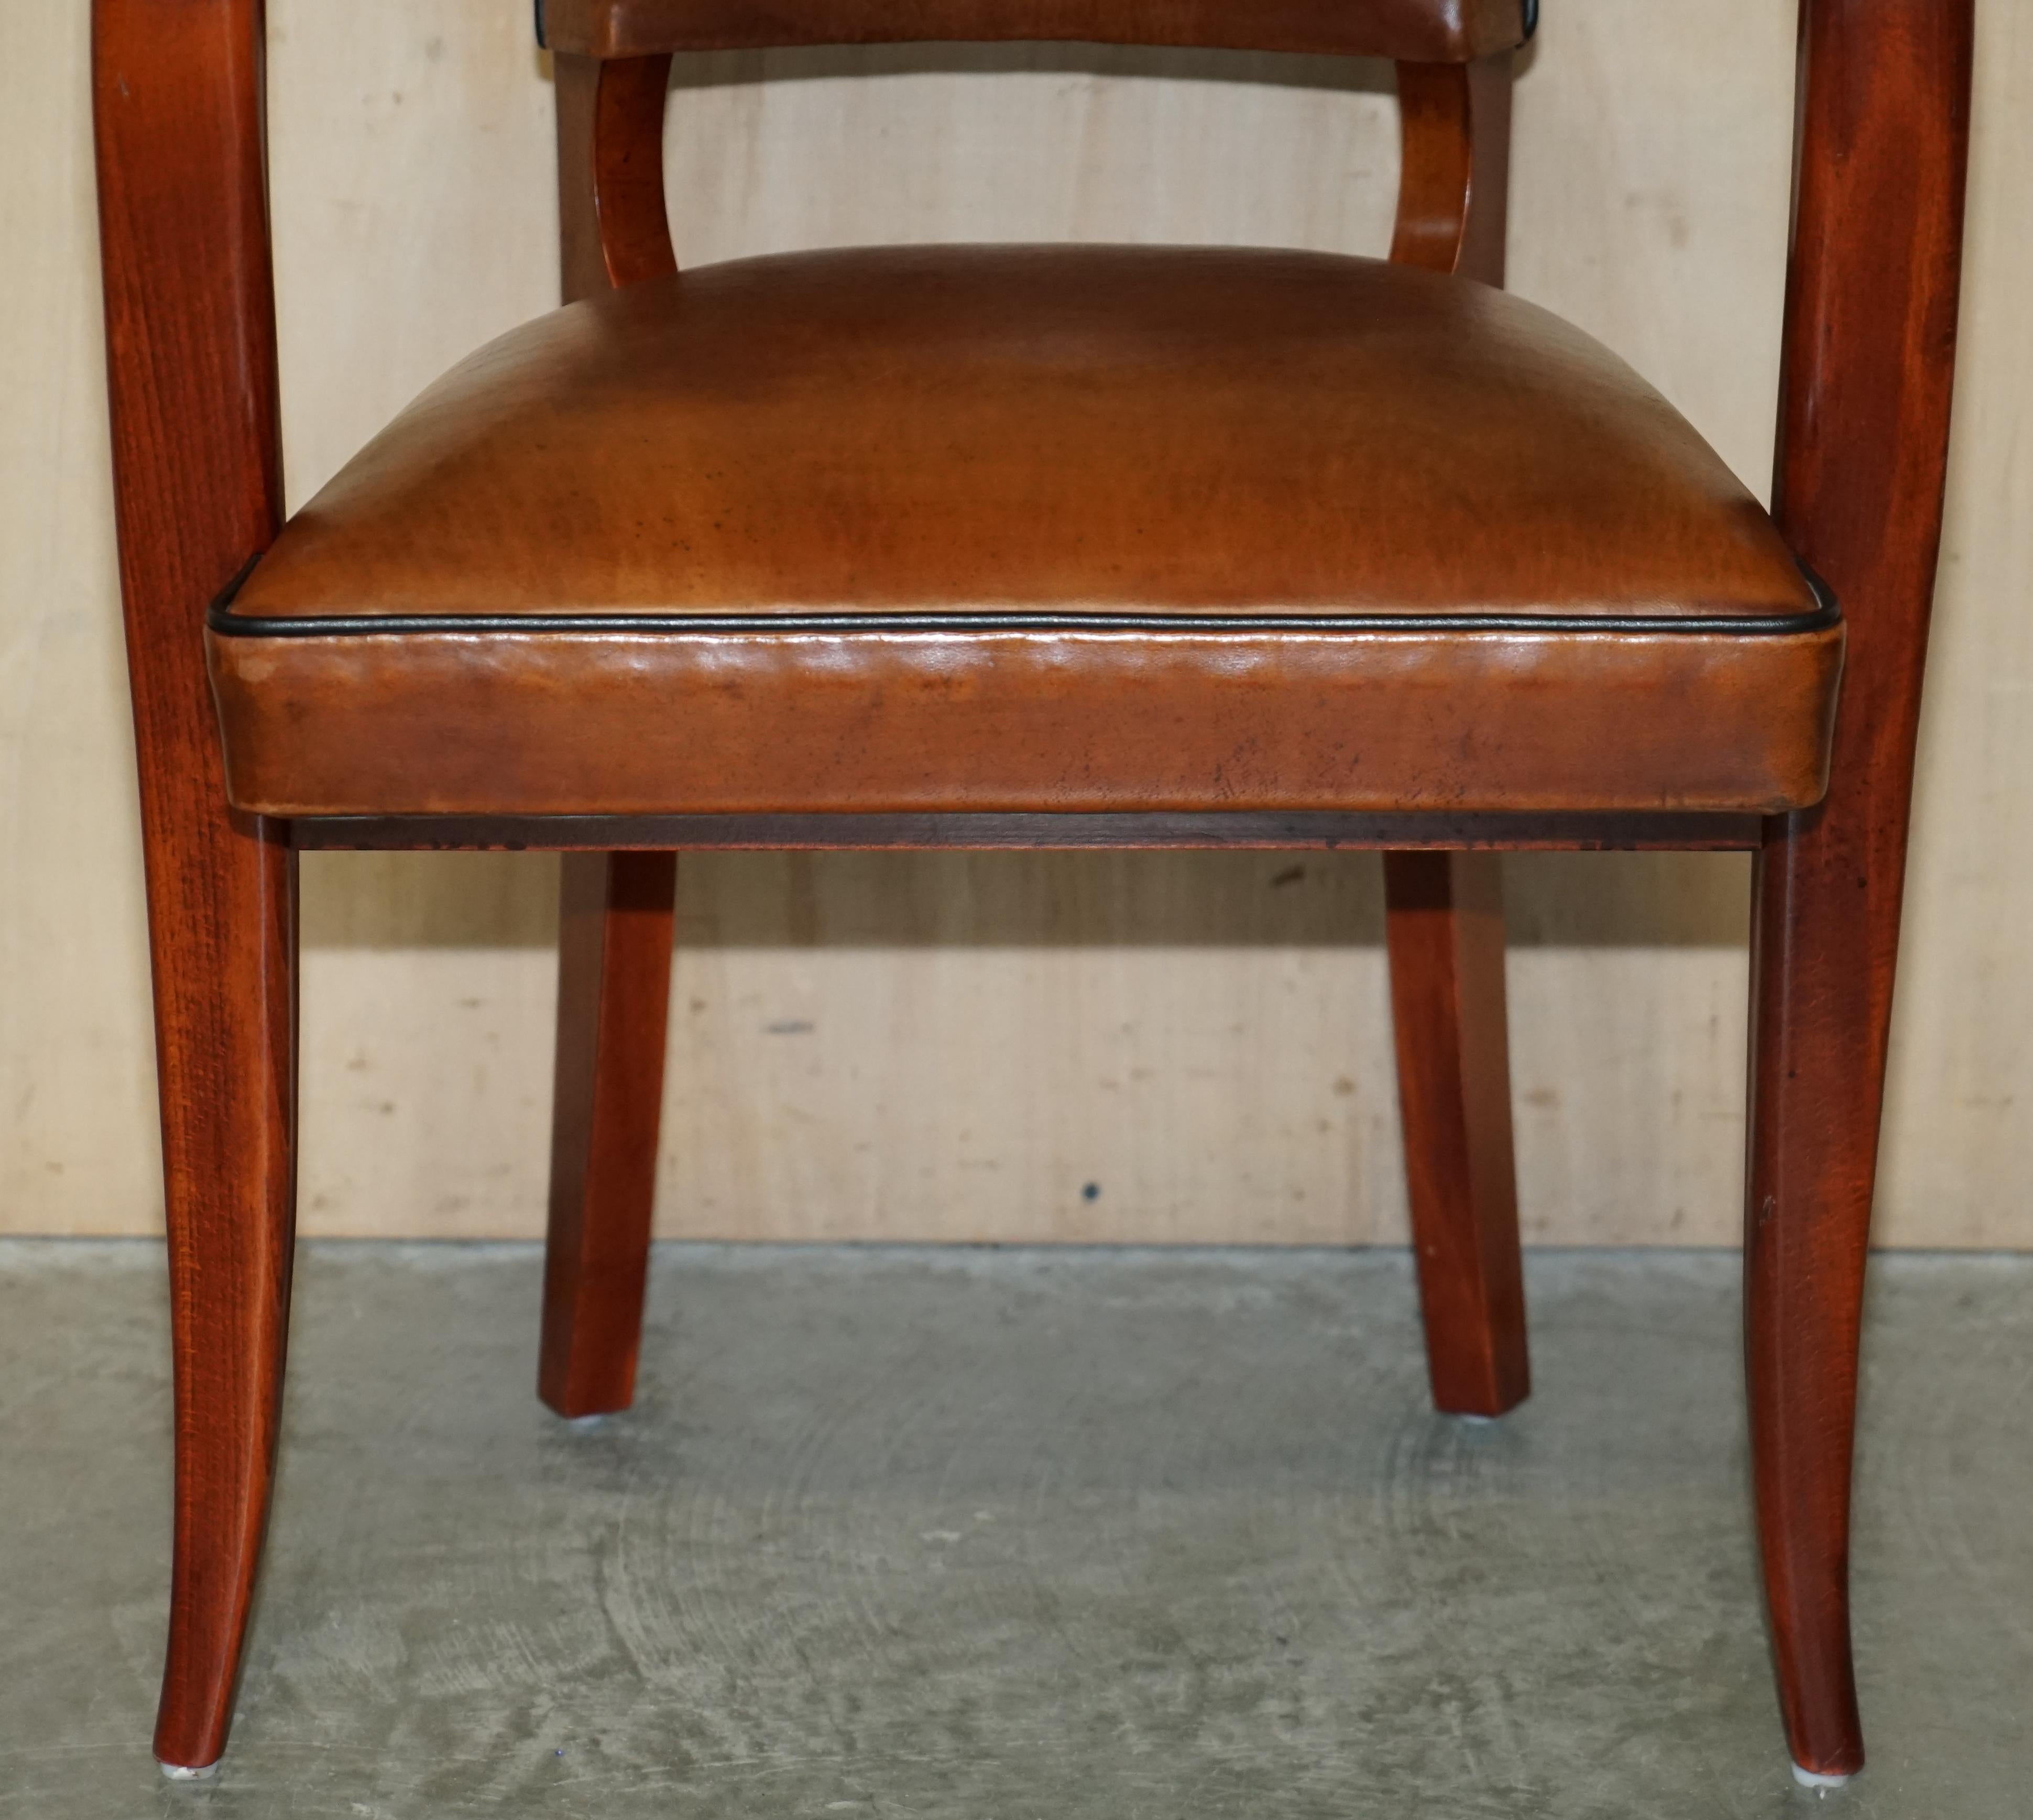 20th Century Art Deco Style Ralph Lauren Brown Leather Office Desk Chair Sculpted Frame